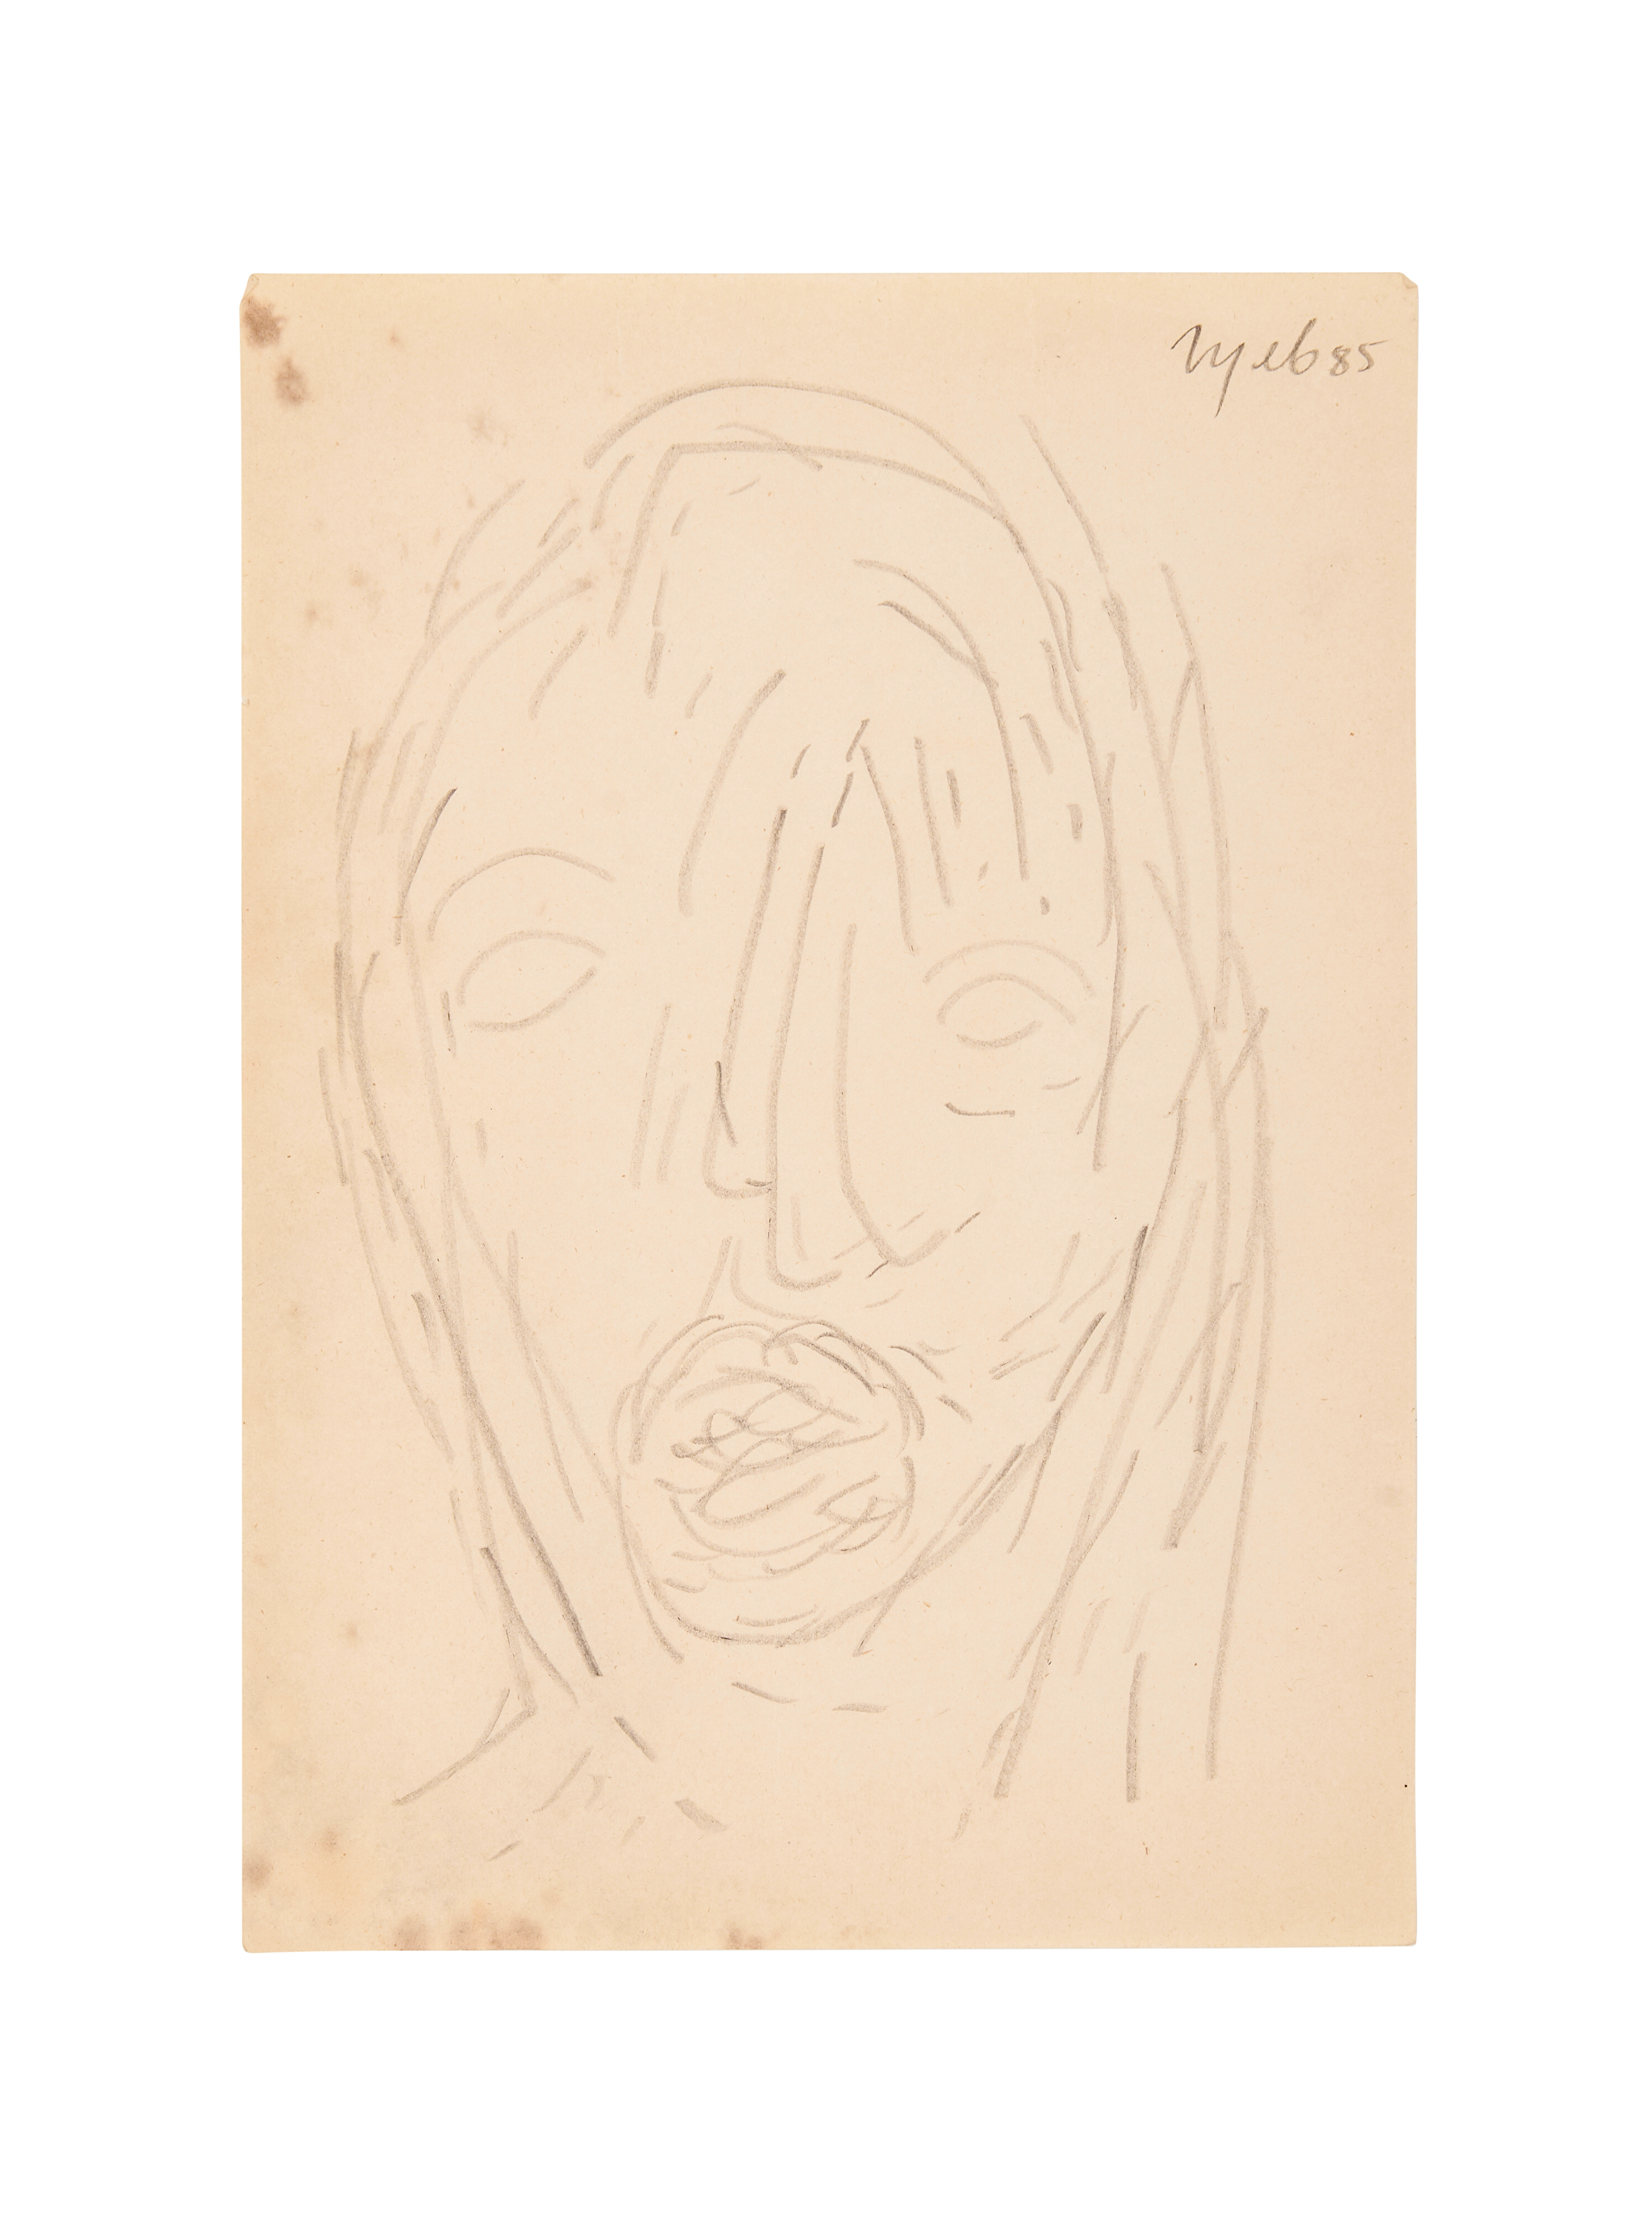 TYEB MEHTA, HEAD, PENCIL/CHARCOAL ON PAPER, SIGNED & DATED TOP RIGHT